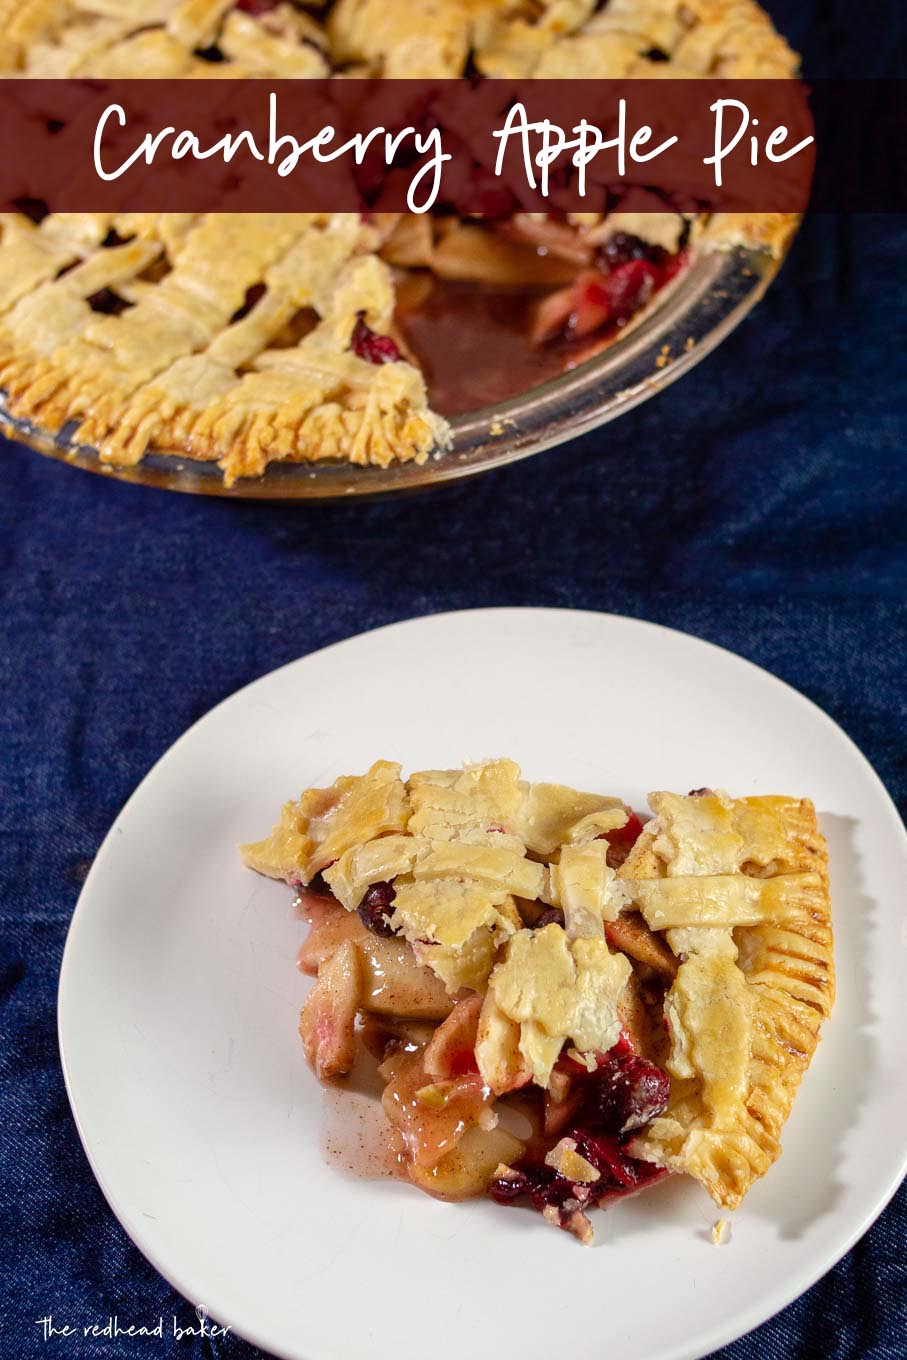 A slice of cranberry apple pie in front of the whole pie